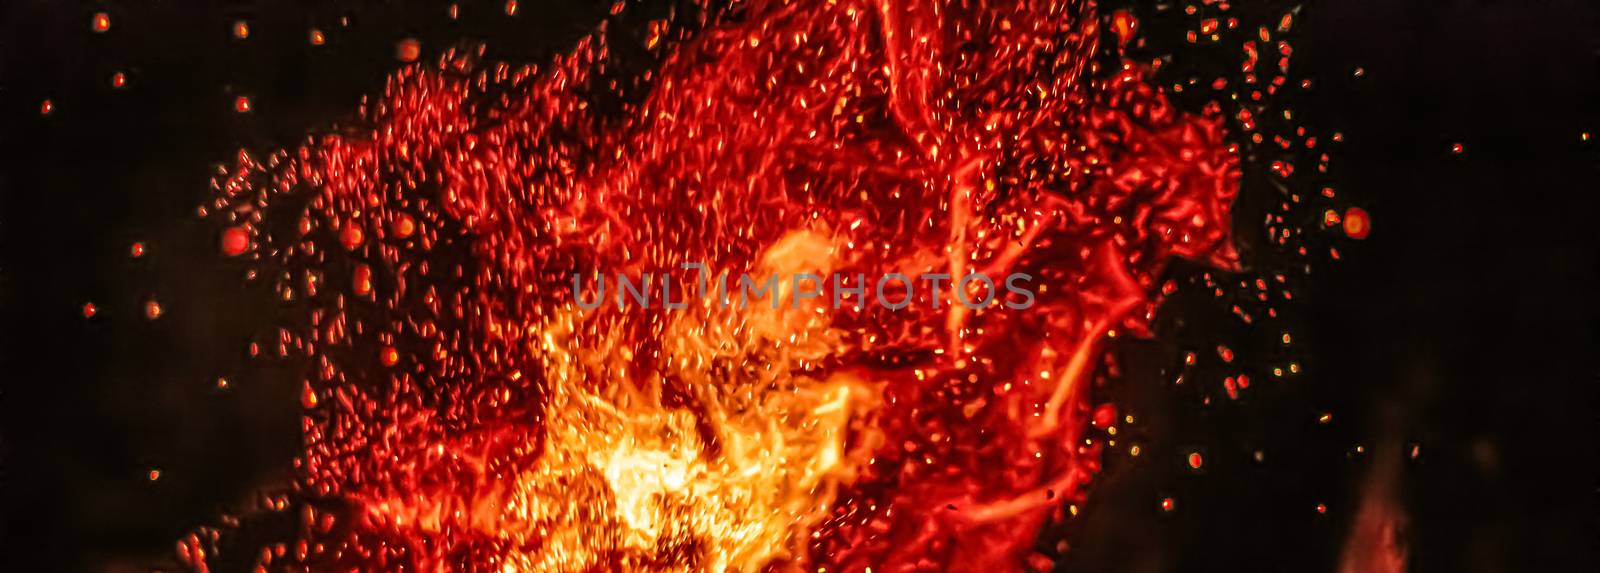 Hot fire flames as nature element and abstract background by Anneleven